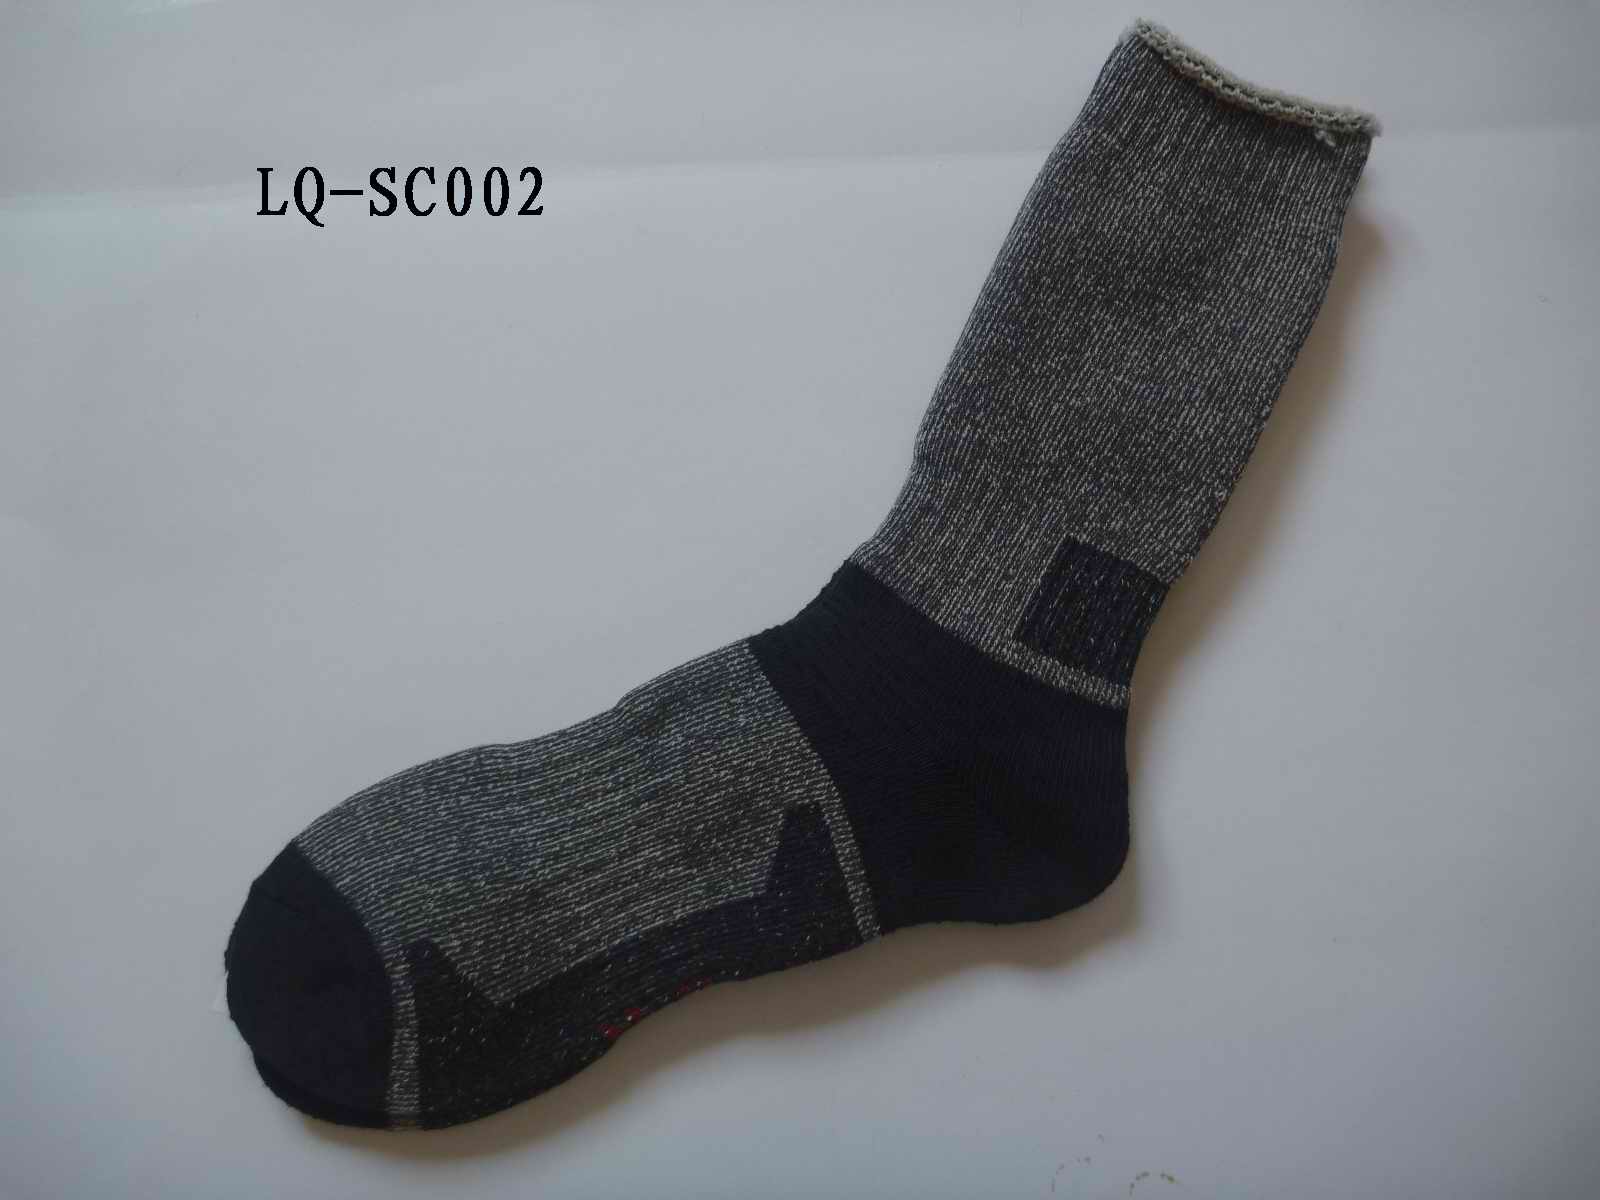 <img src='../manage/Upload/Pic/20123714838964.jpg' width='400' style='border:3px solid #EEEEEE;'><div align=center>Name:OUTDOOR SOCKS,No.:2030282,Price:0 元</div>